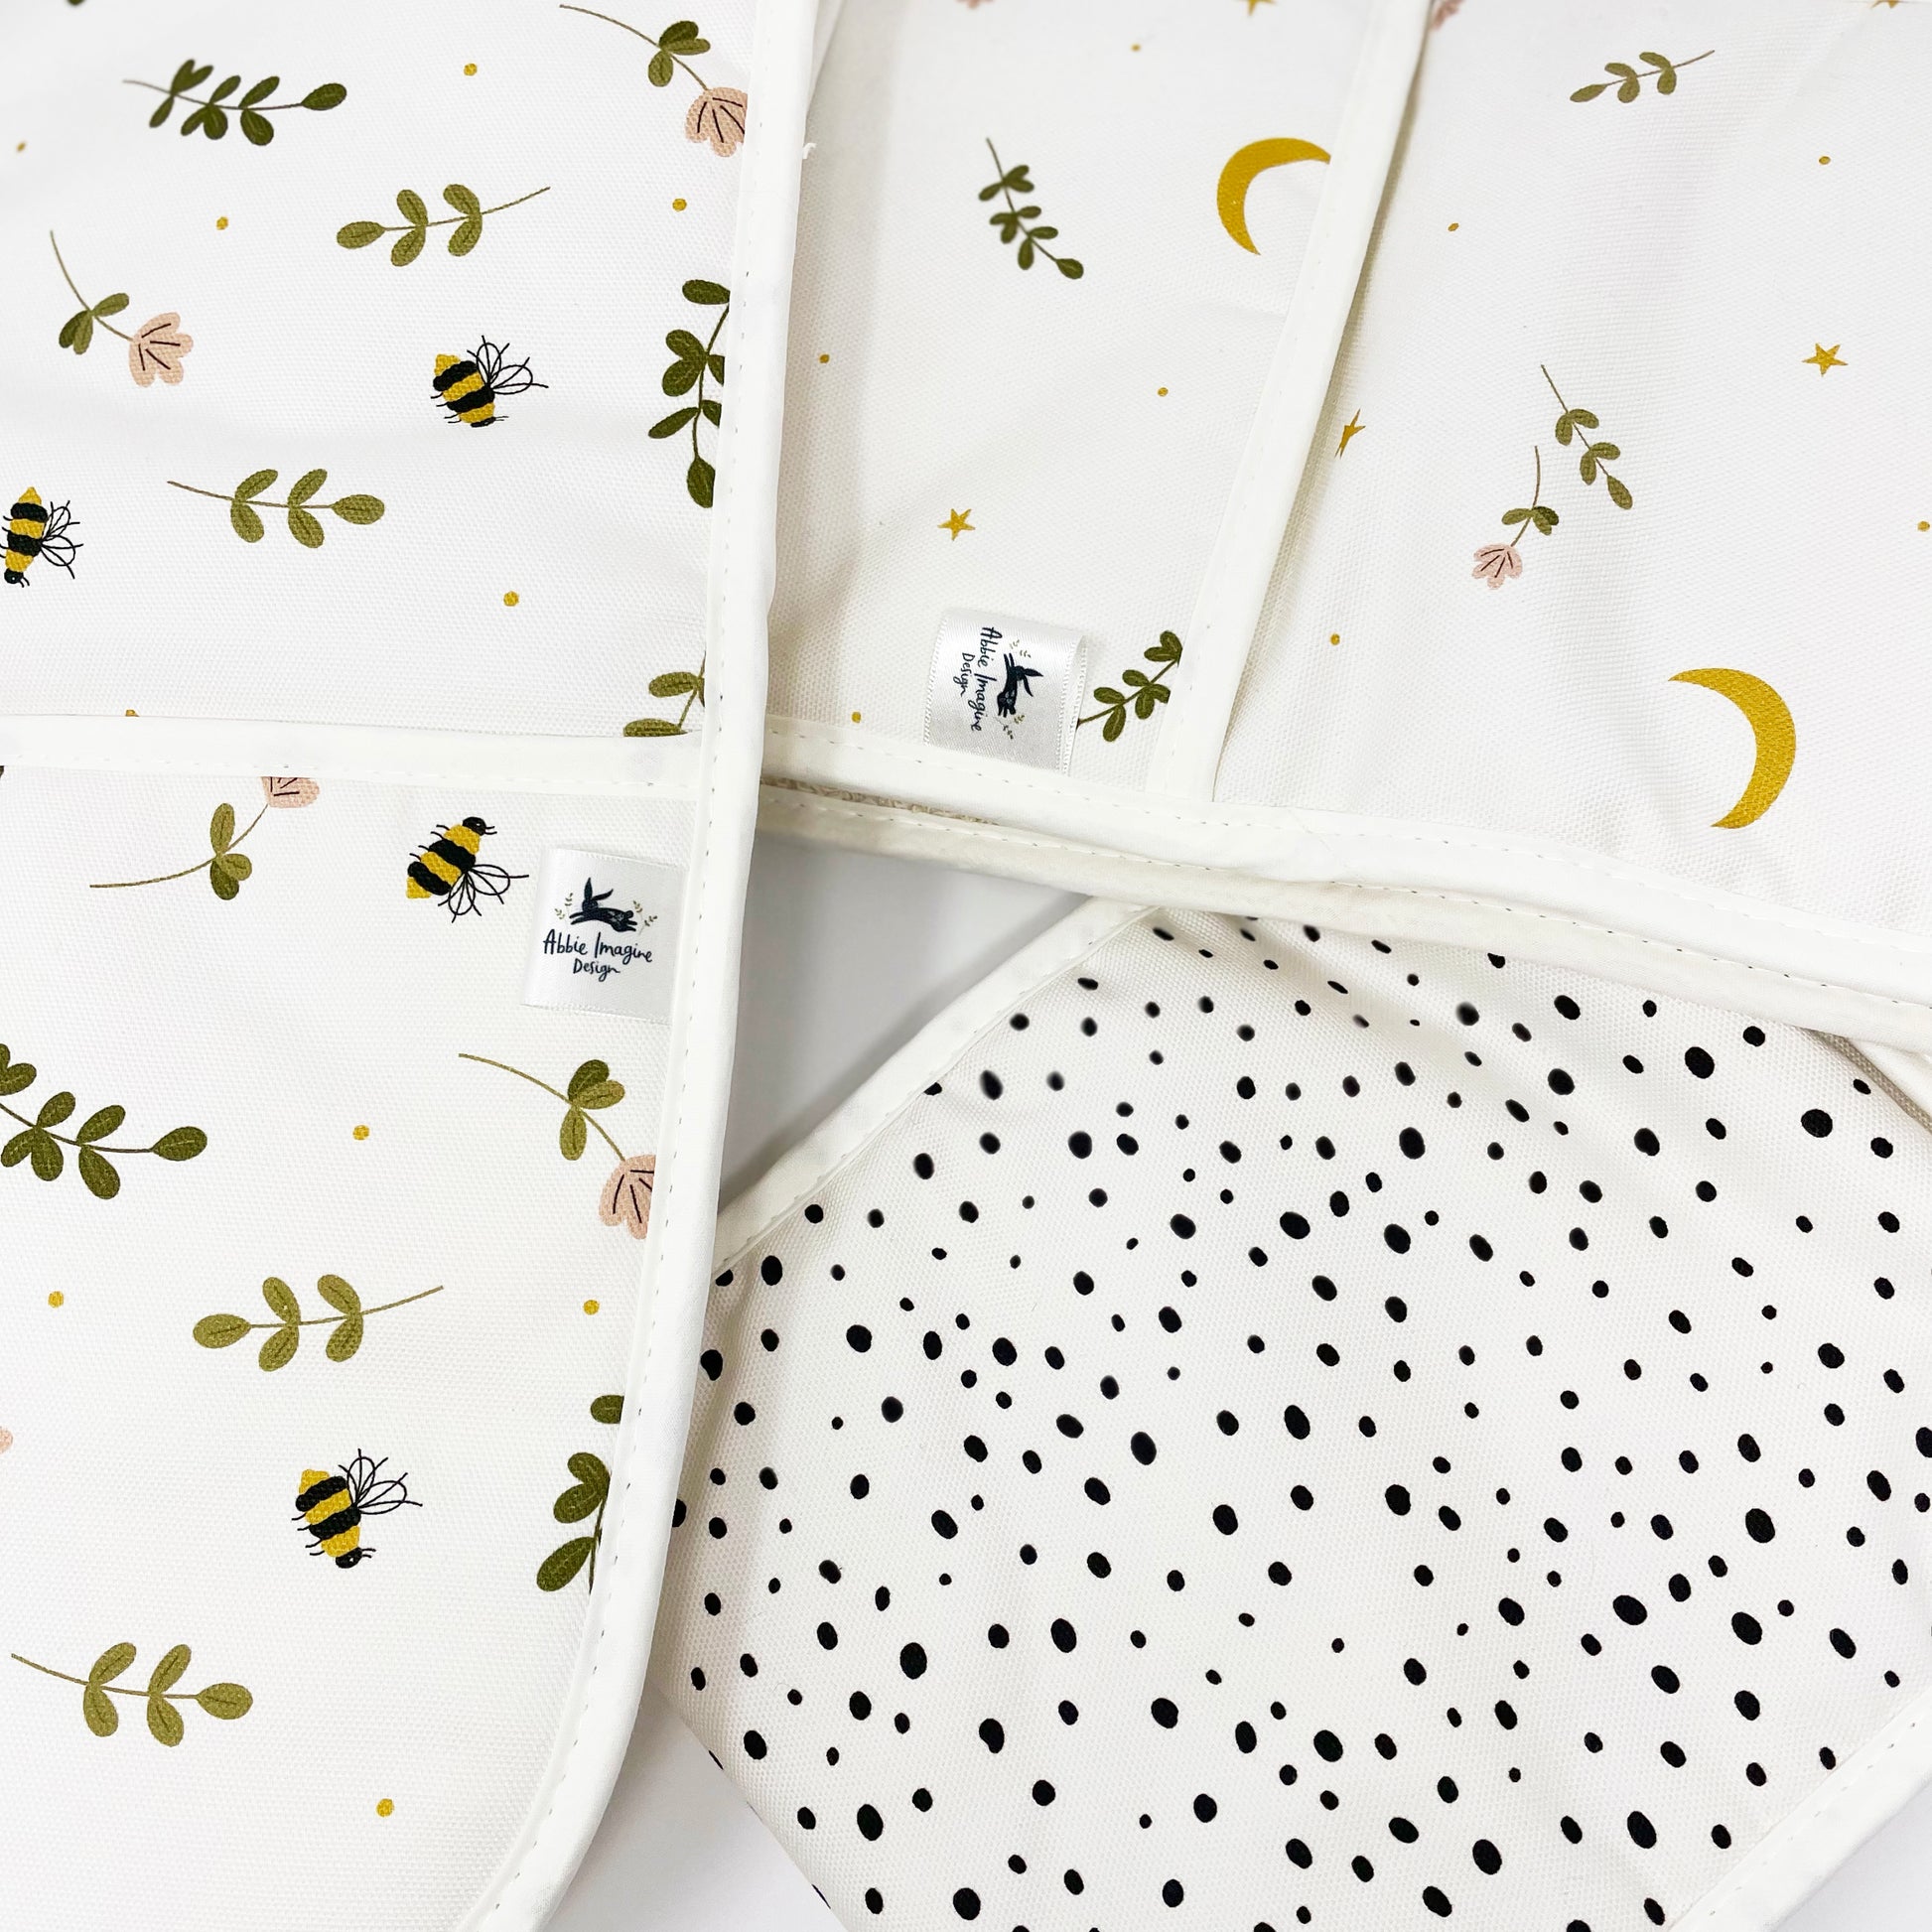 Close up of polka dot, bees and moons oven gloves by Abbie Imagine